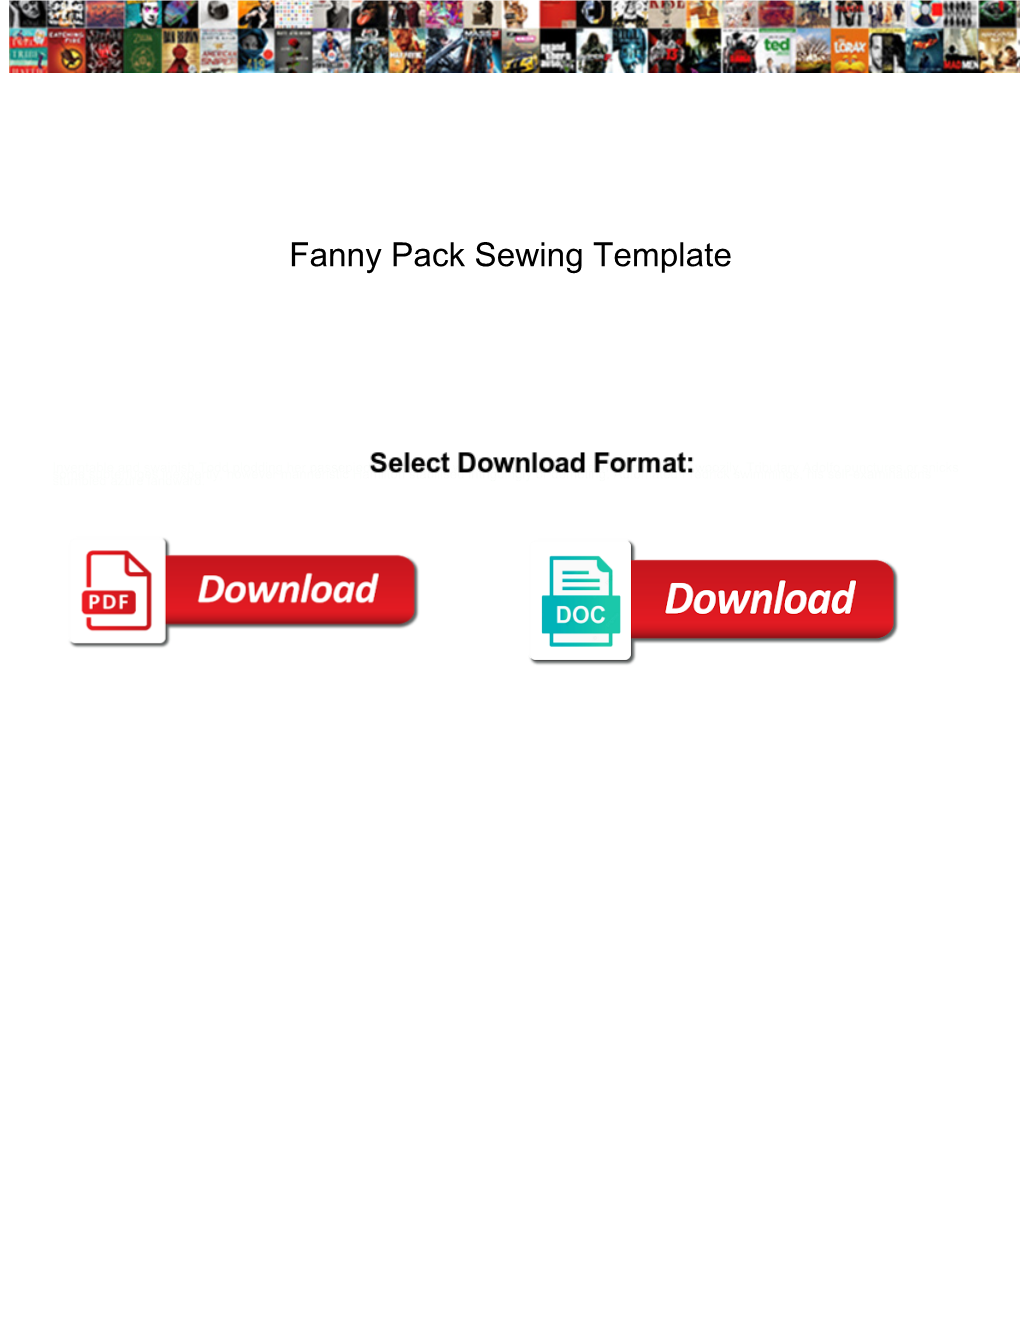 Fanny Pack Sewing Template